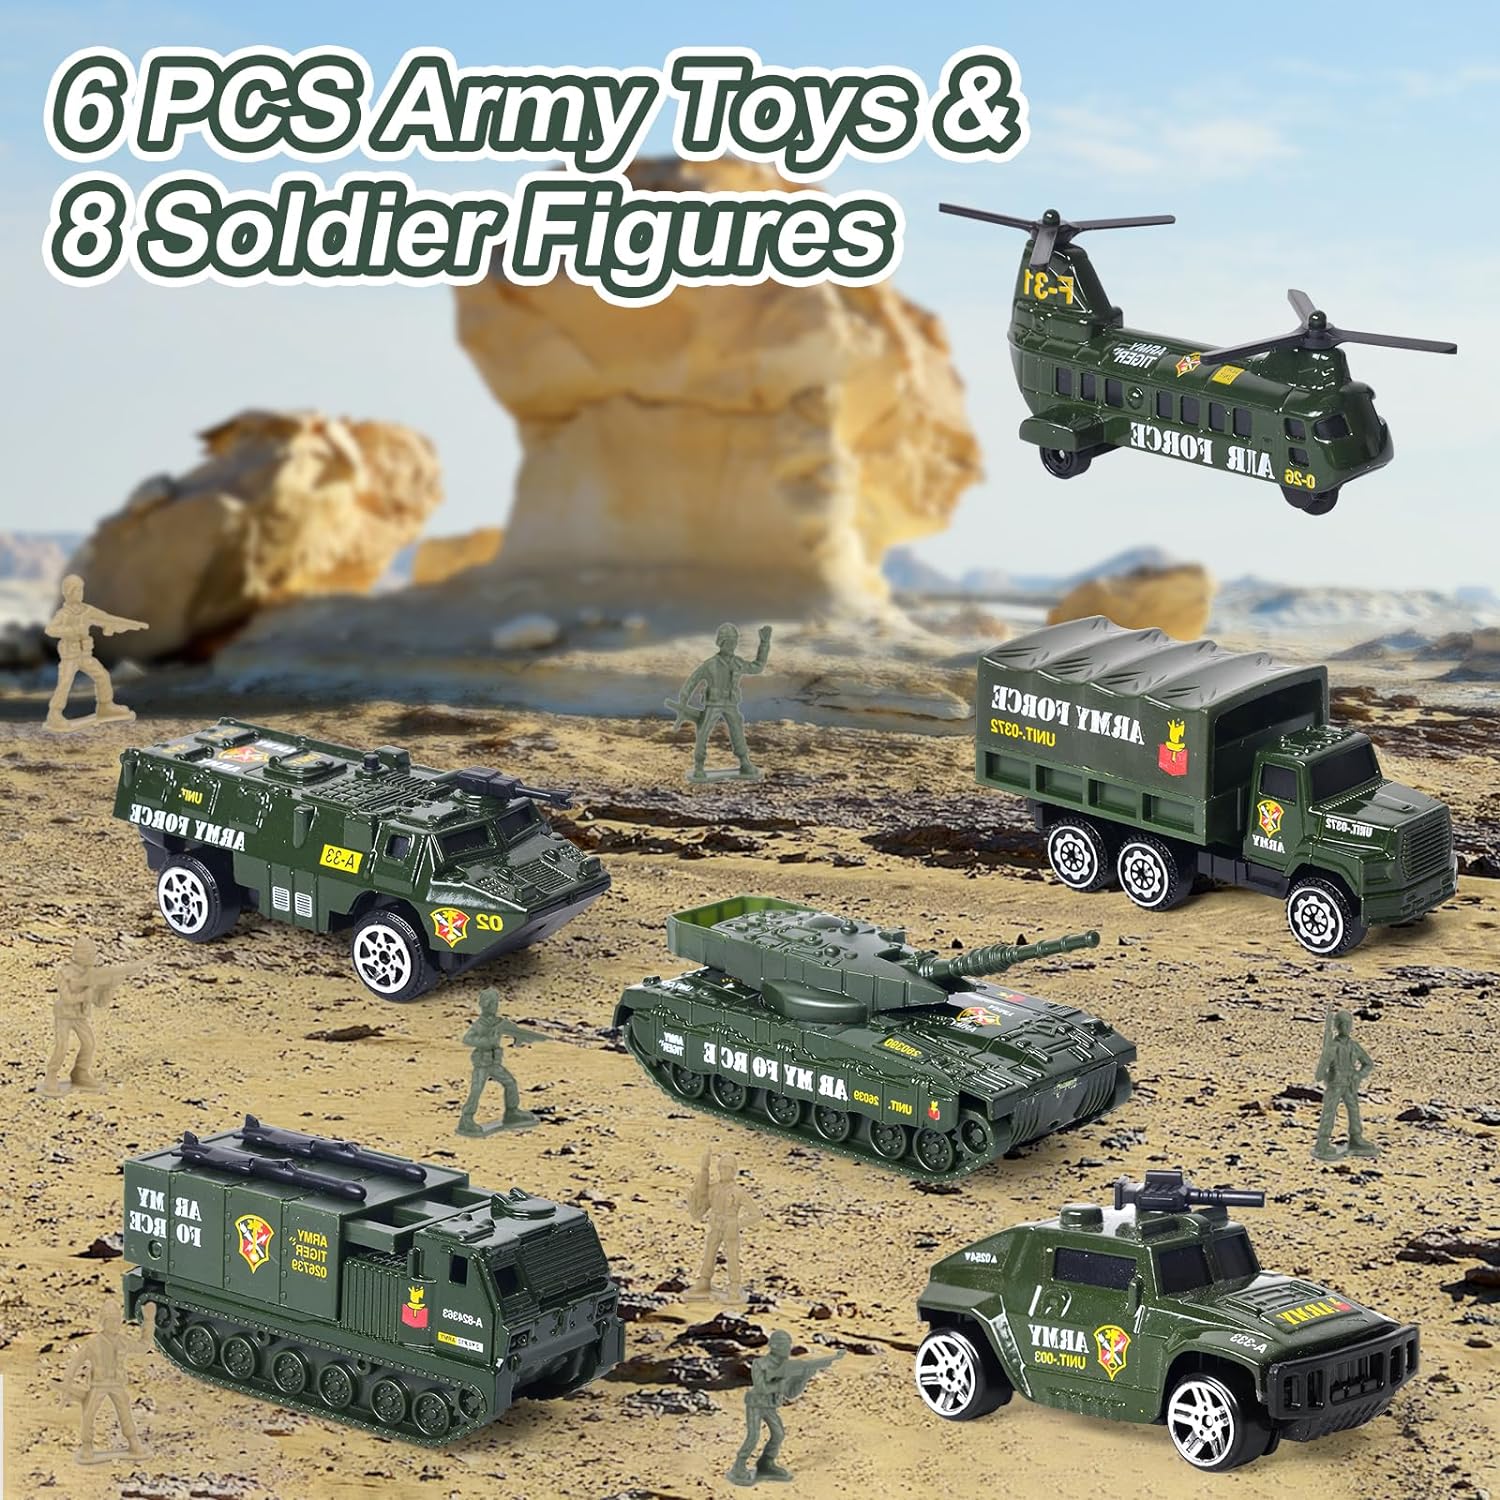 Tank Toys Set for Boys 3-5, 6 PCS Die-Cast Army Toys & 8 Soldier Figures, Military Toys with Light & Sound - Cykapu